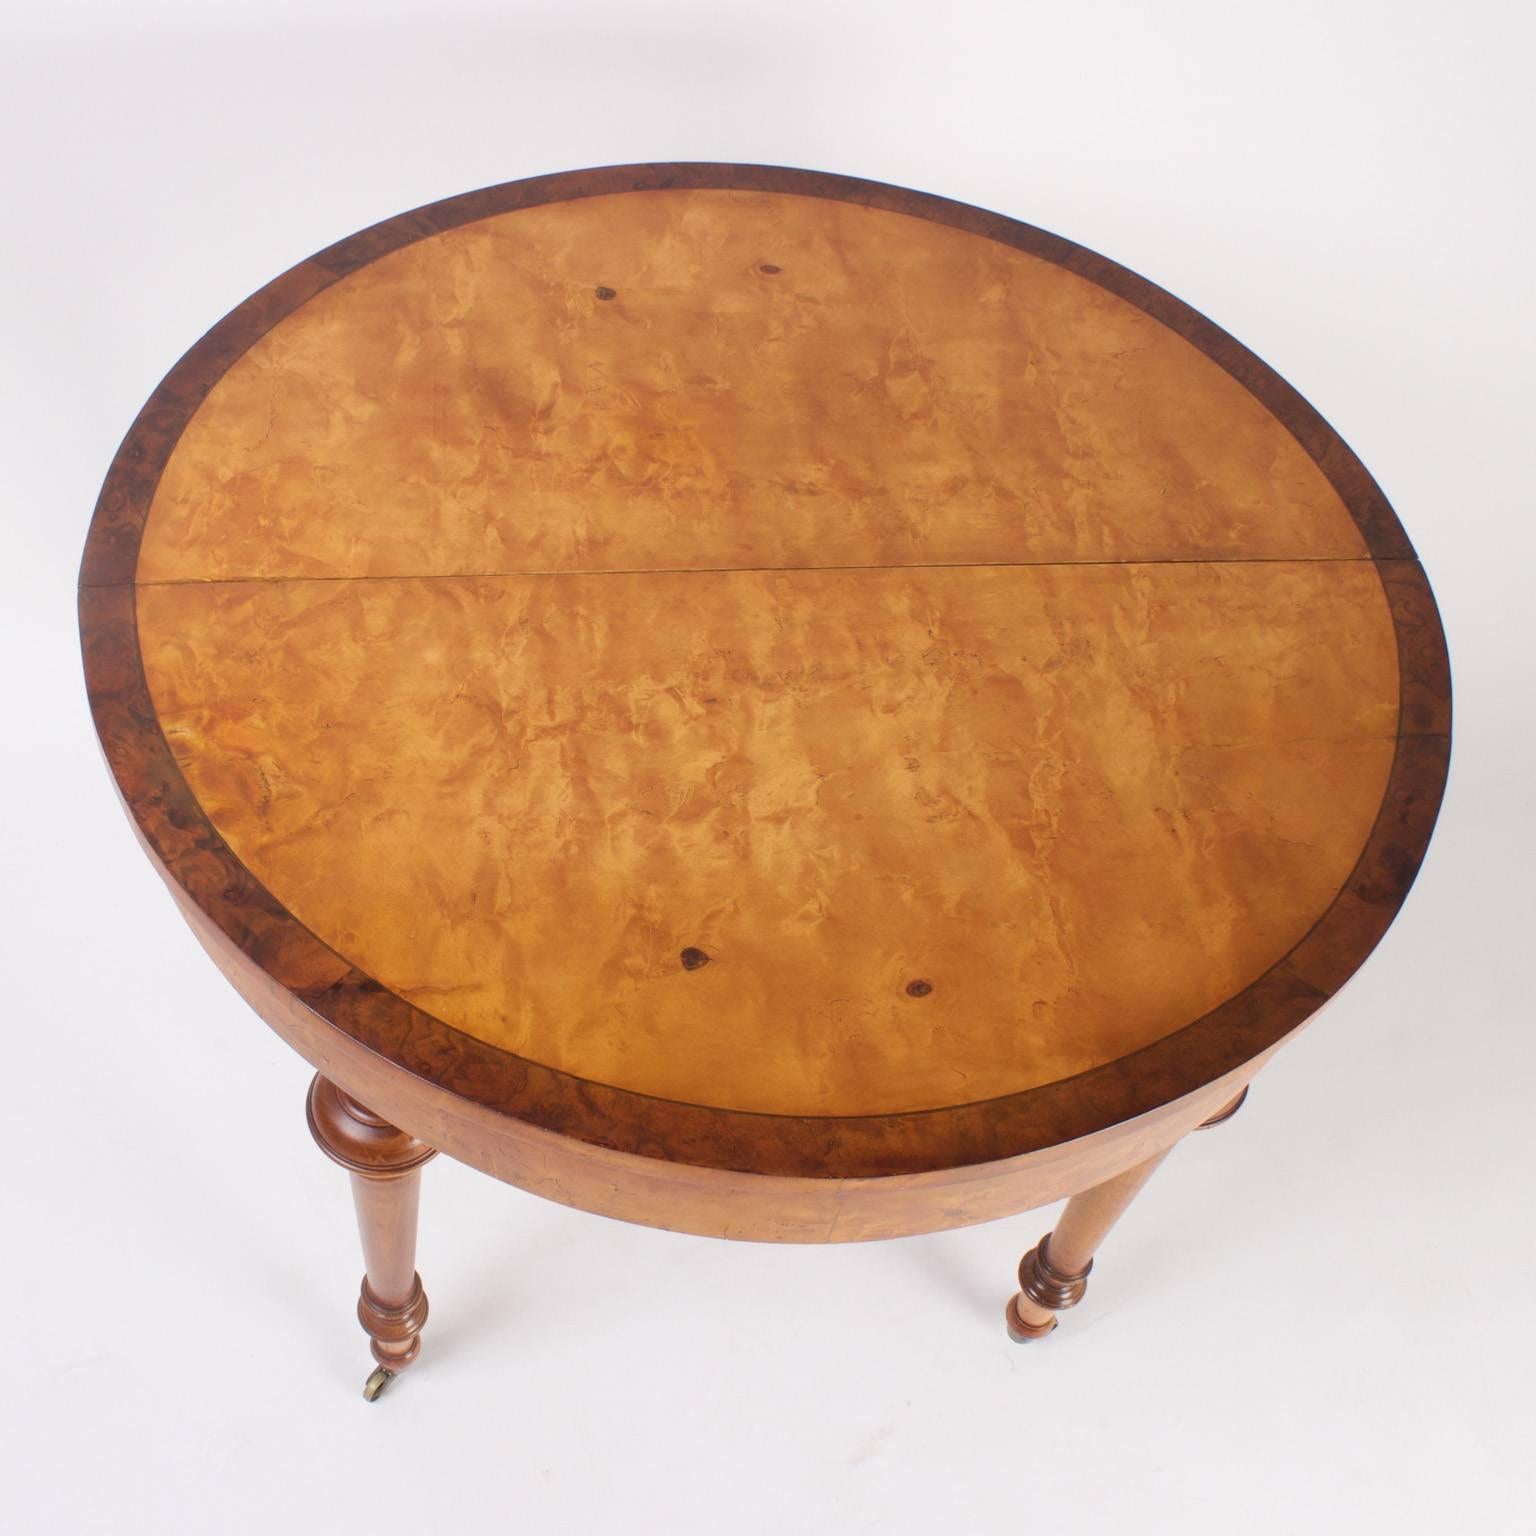 Impressive Napoleon III dining table with a rare burled maple top banded in burled walnut. The five turned legs are also maple set on brass casters. Pictured as a round table which could be used as a center table or dinette.  Also pictured with one